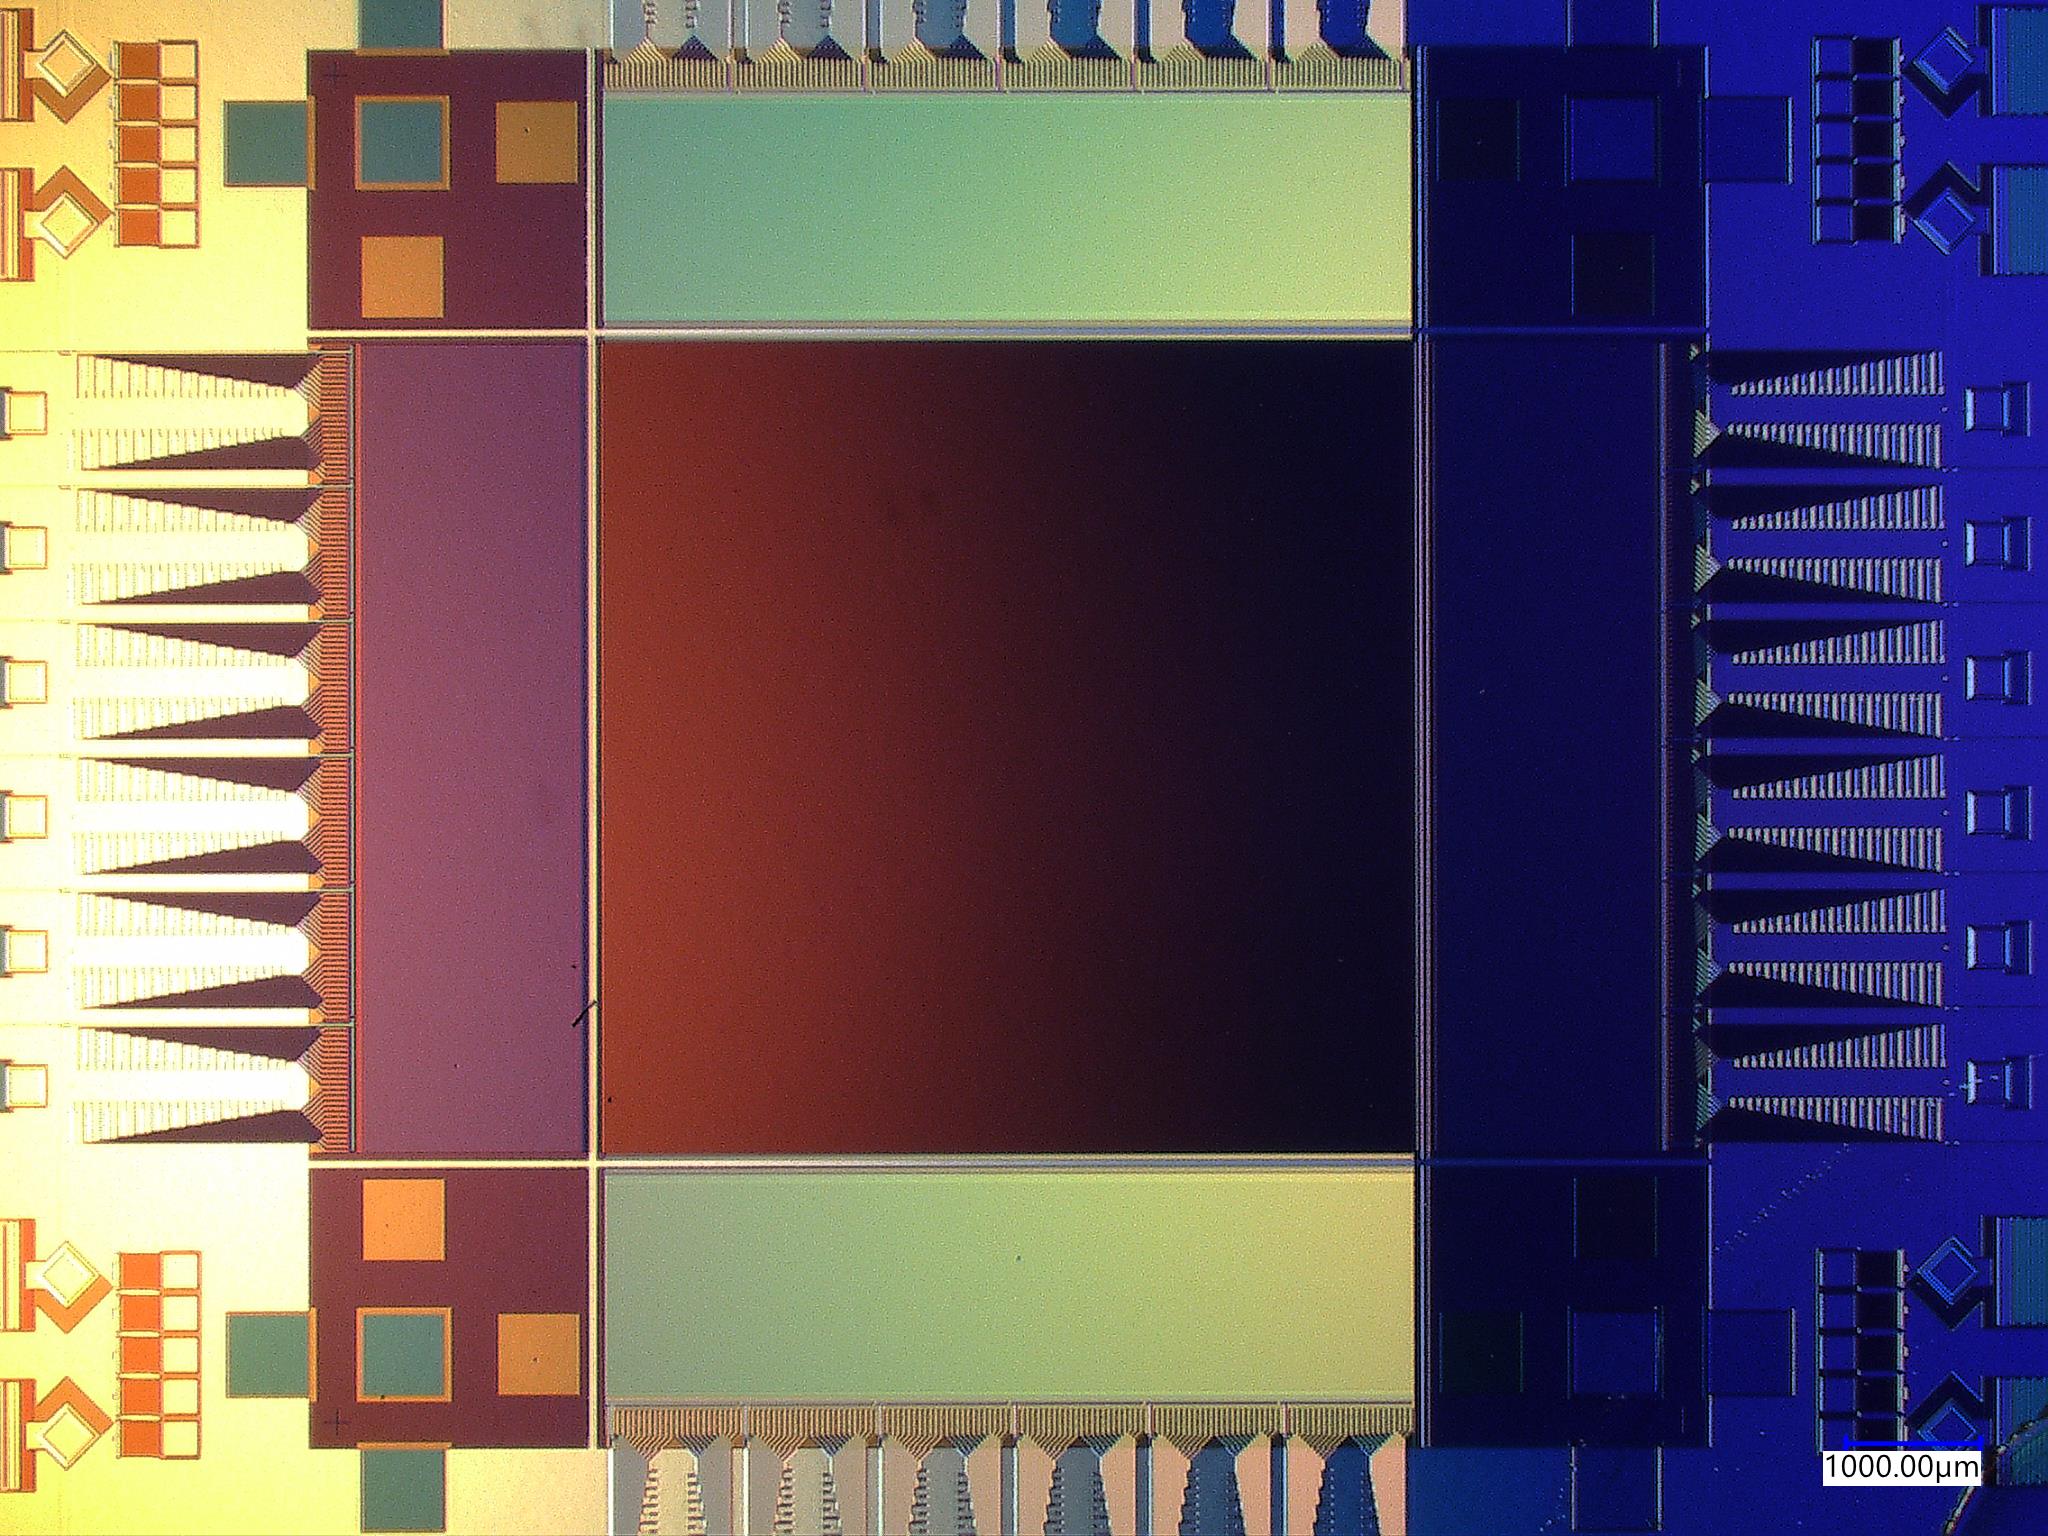 A microscope image of a rectangular chip, showing the different parts of the superconducting camera, including imaging area and ancillary electronics. The chip has a colorful patina, with hues of yellow on the left, red in the center, and blue on the right.